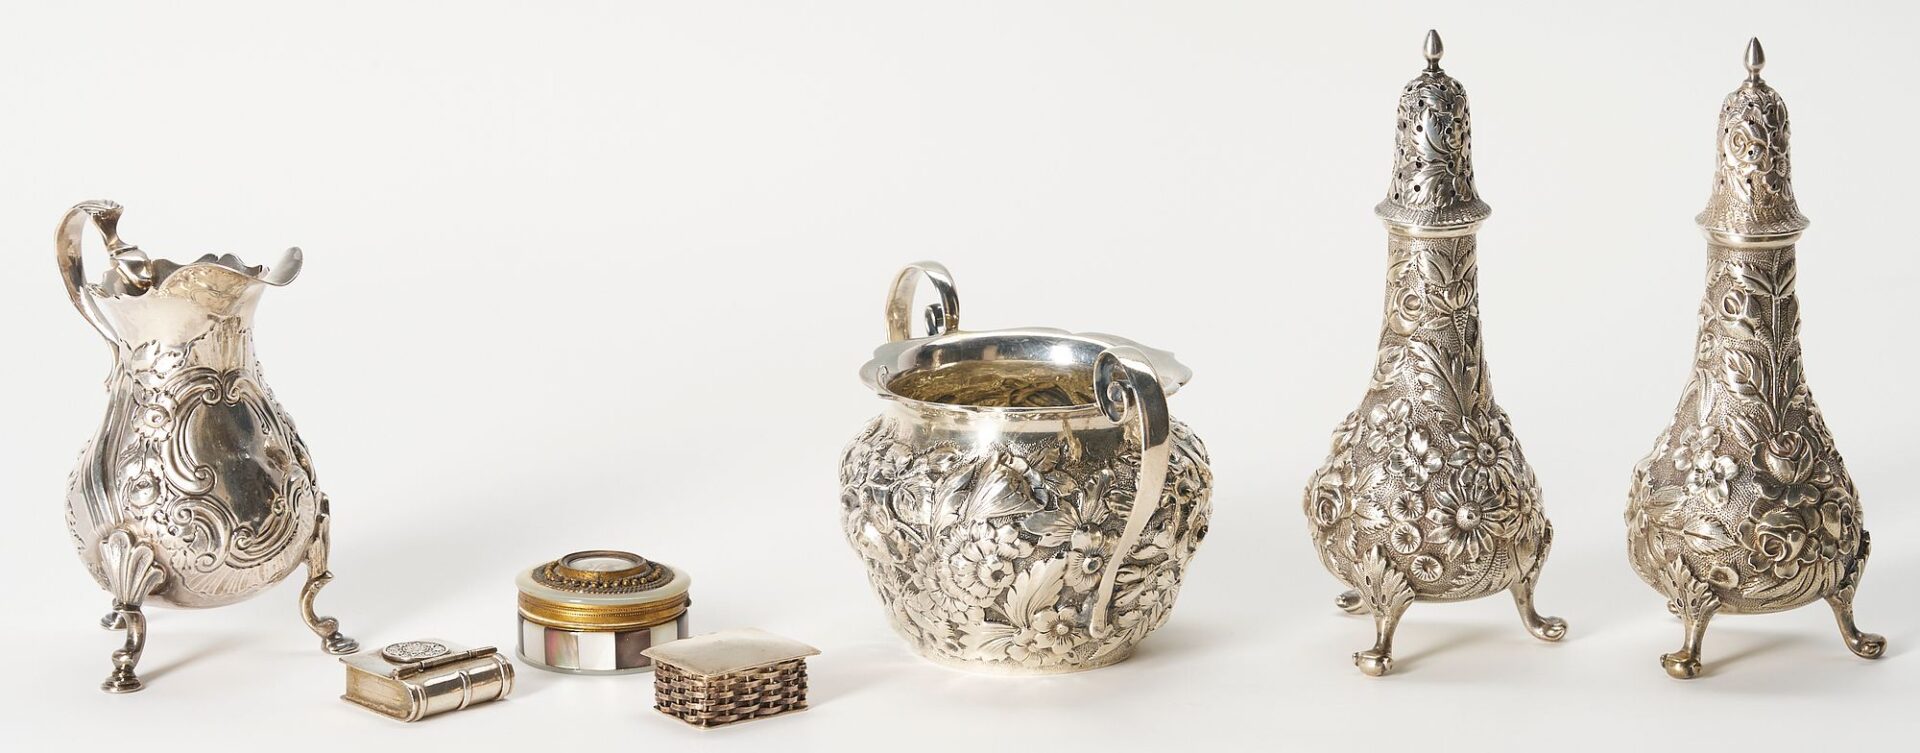 Lot 1070: 7 Items incl. Sterling Repousse Shakers, Snuff or Pill Boxes